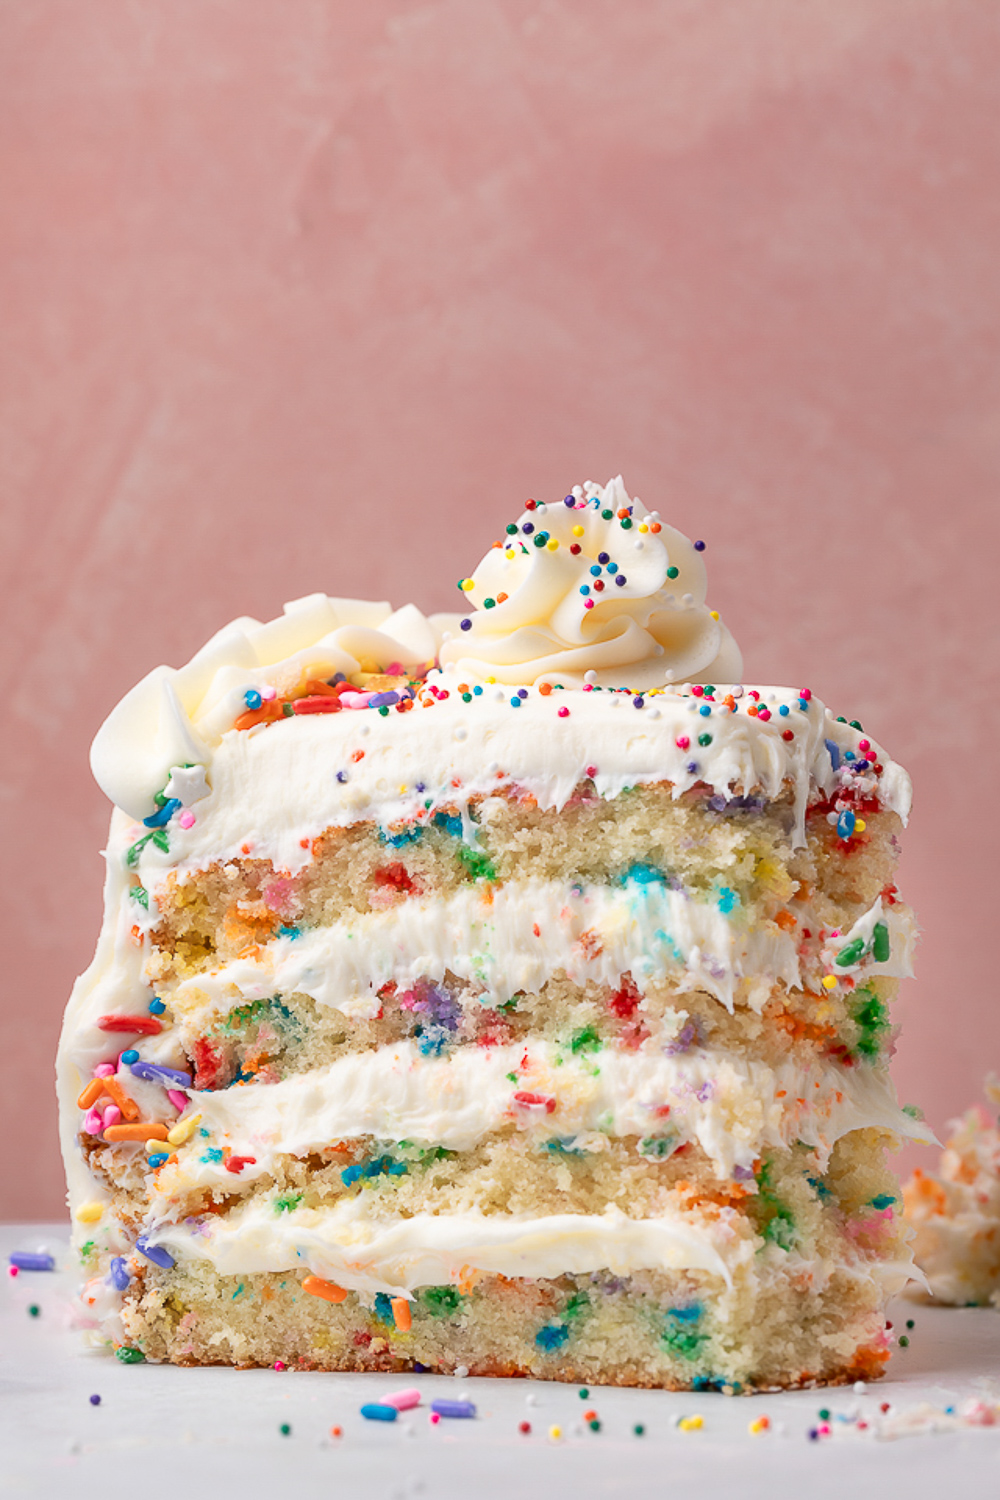 7 Birthday Cake Flavors  Our Baking Blog Cake Cookie  Dessert Recipes  by Wilton